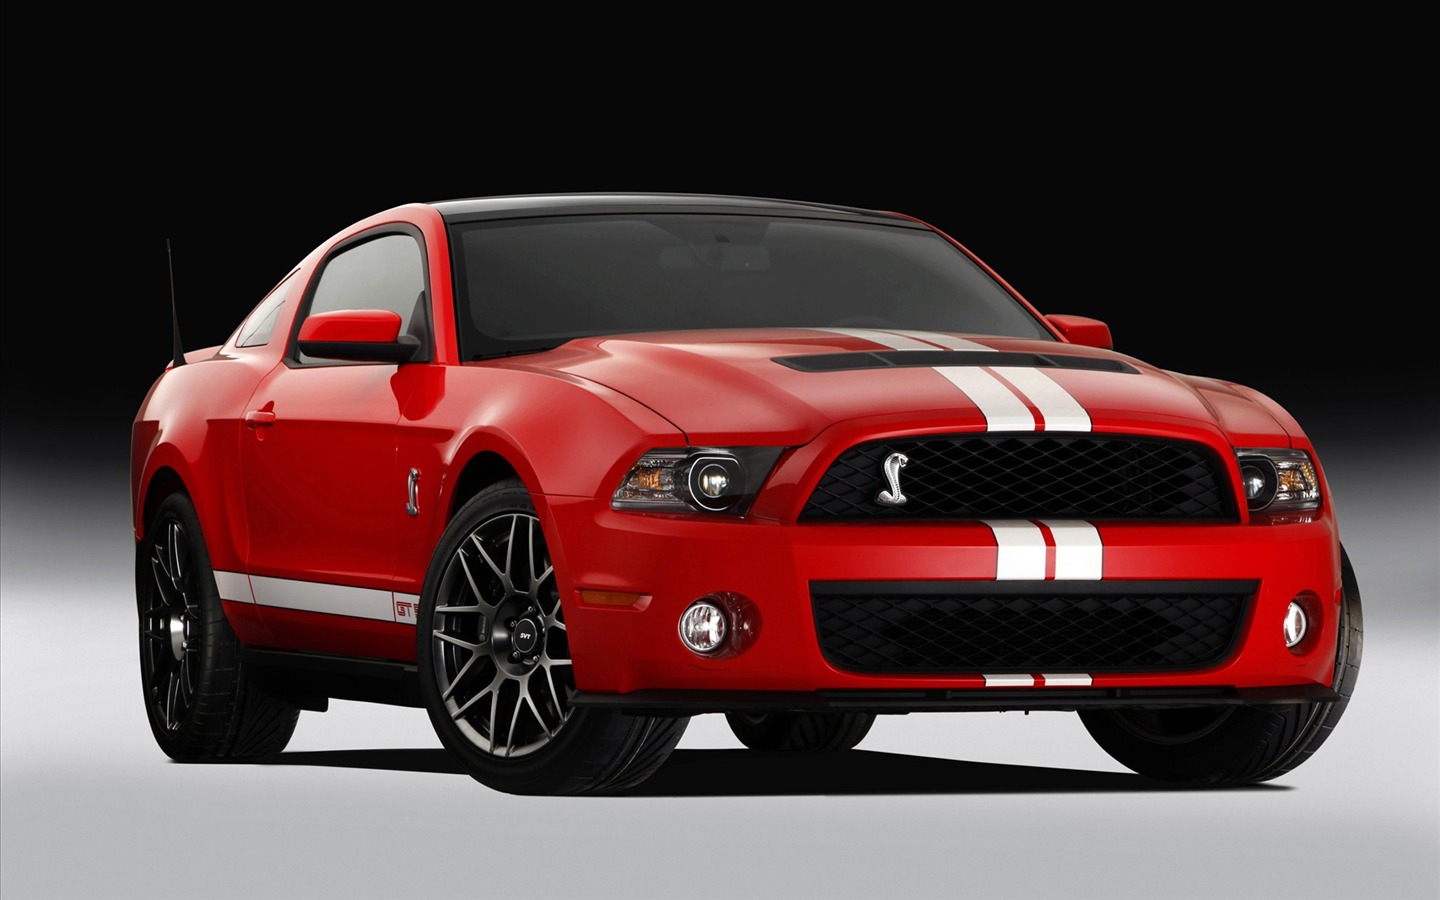 Ford Mustang GT500 Wallpapers #1 - 1440x900